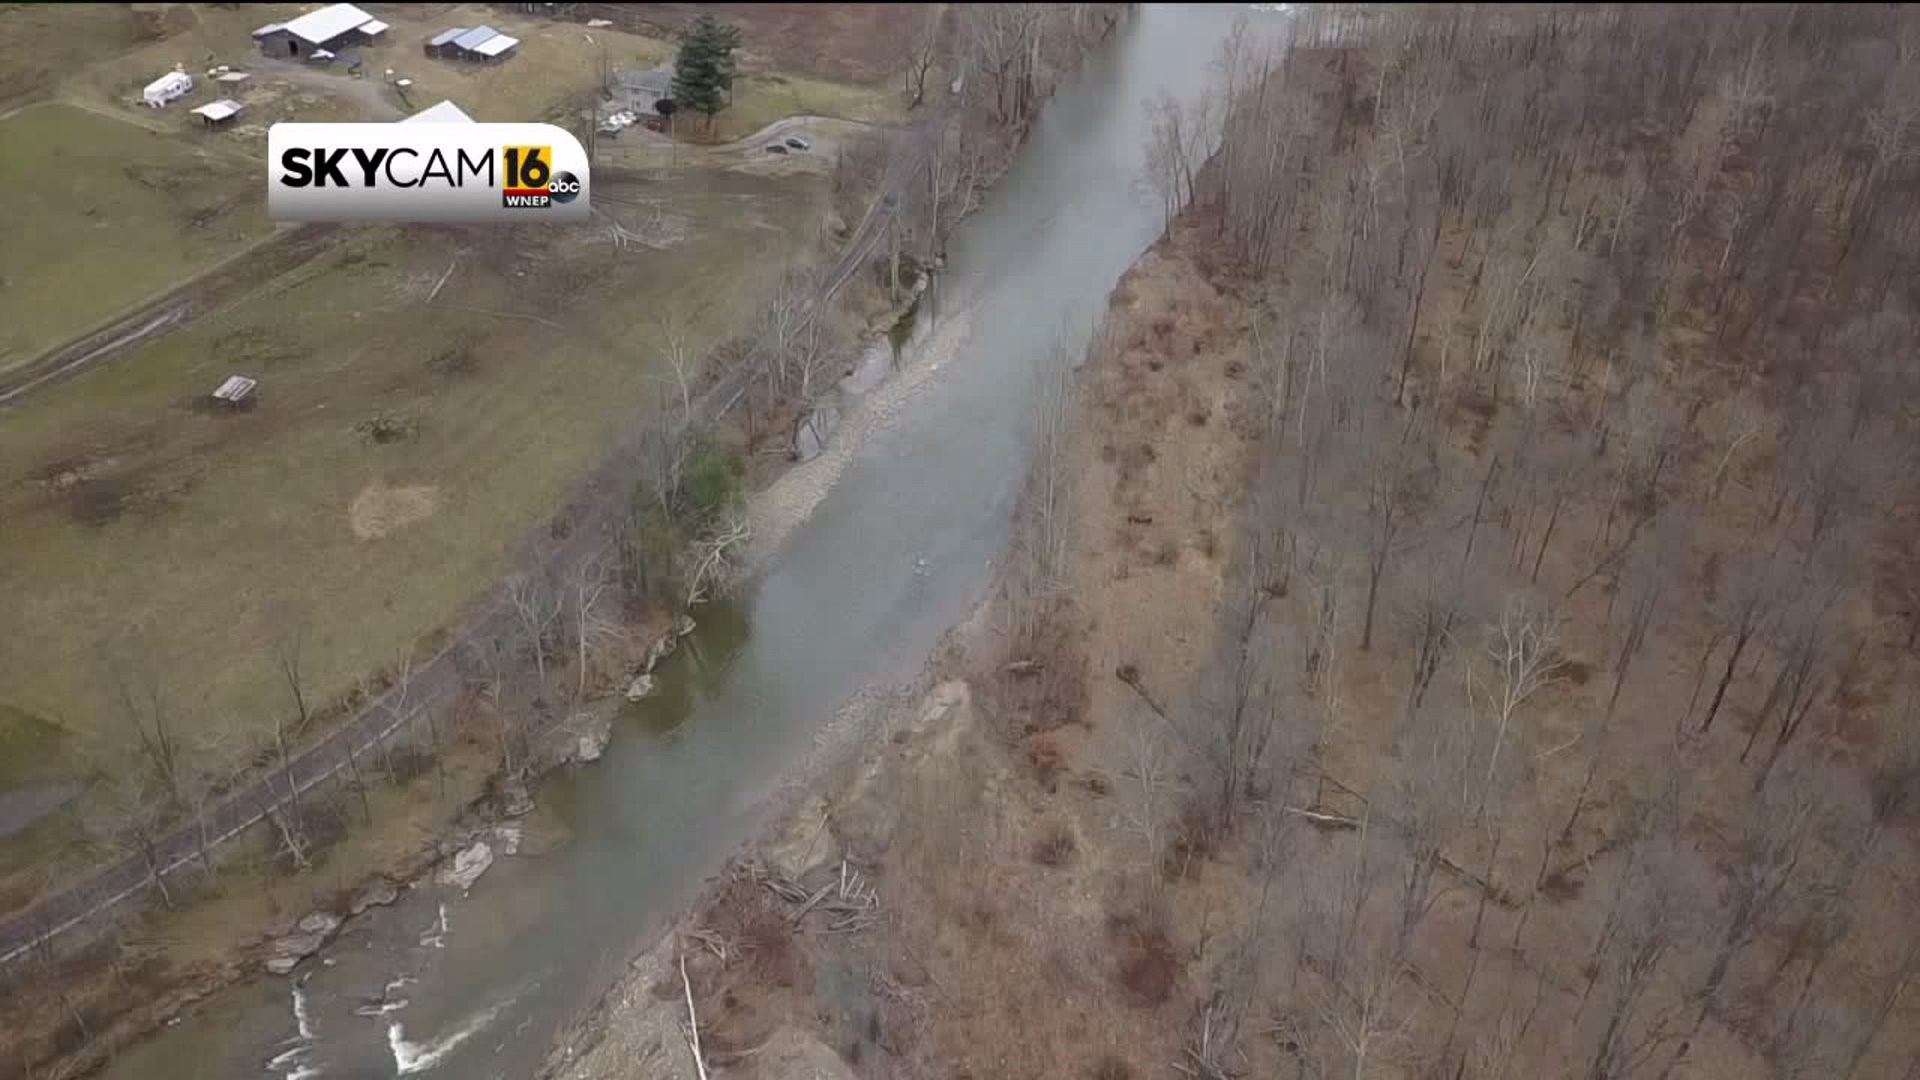 Grant to Fix Flooding Issues in Wyoming County